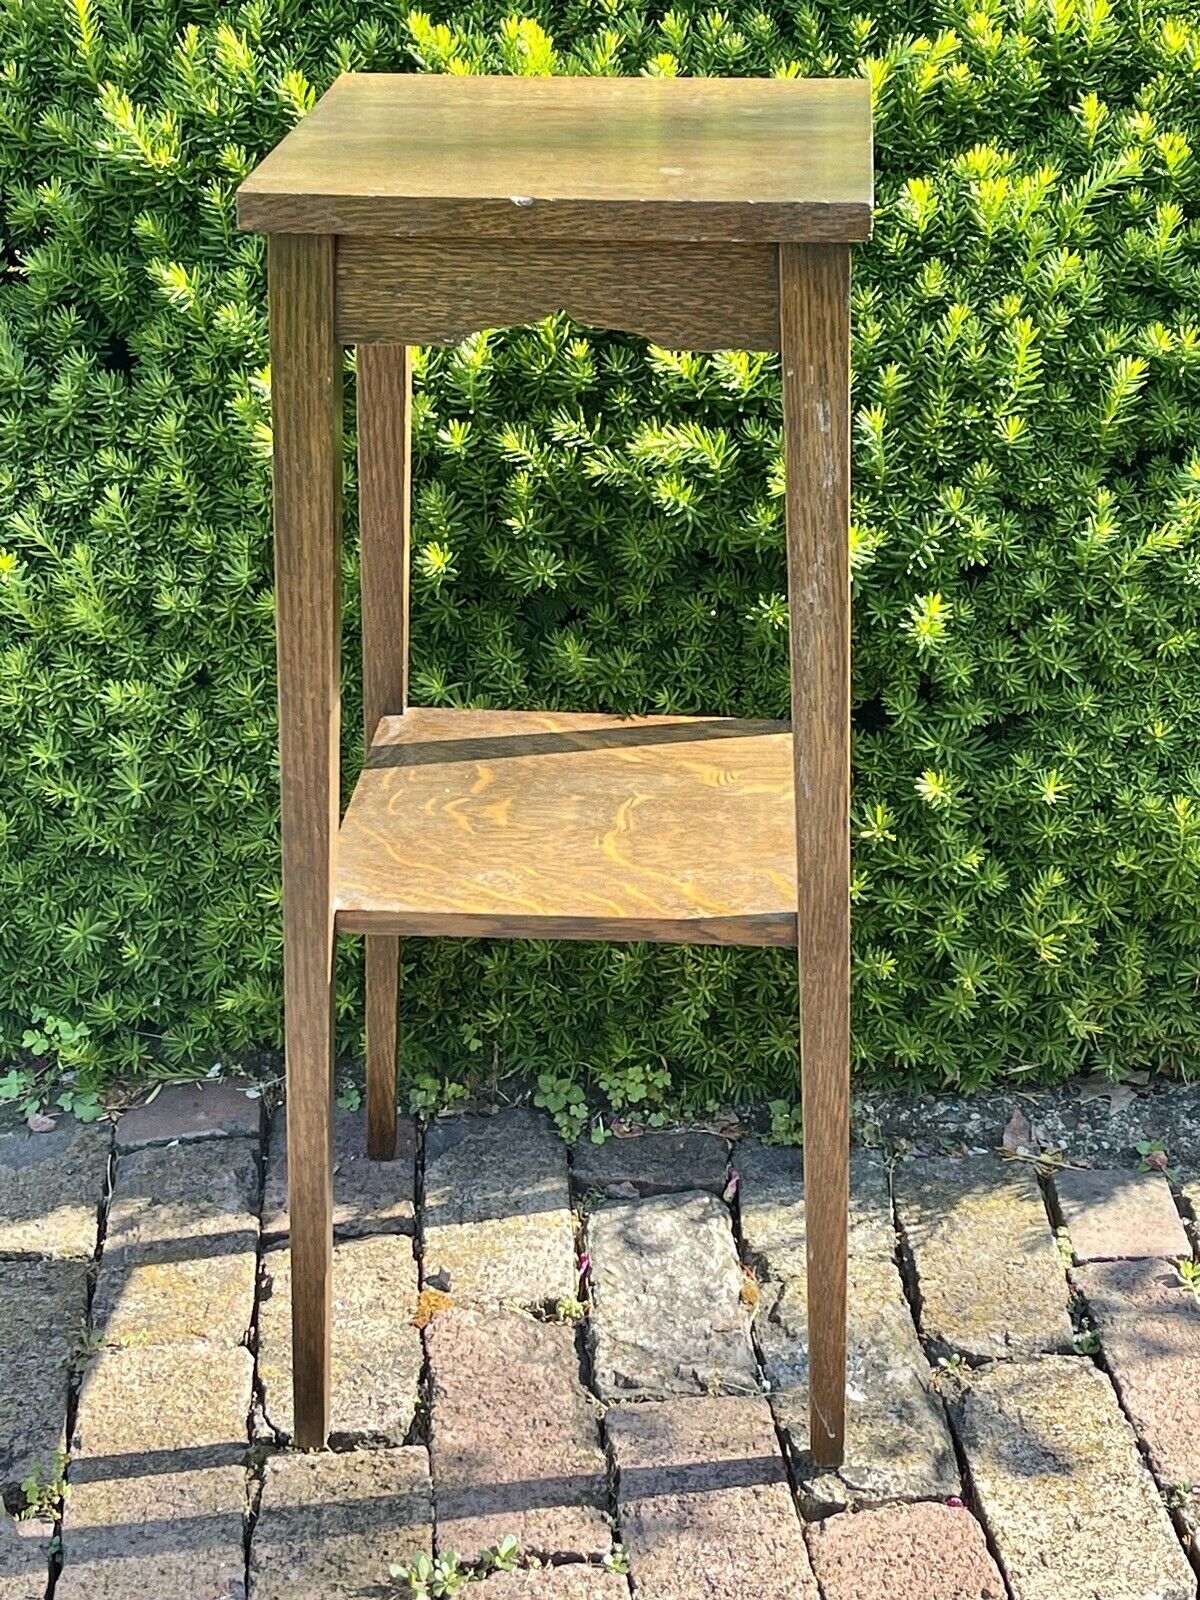 Antique Limbert Style Arts & Crafts Smoke Smoking Tobacco Stand OakTable Taboret